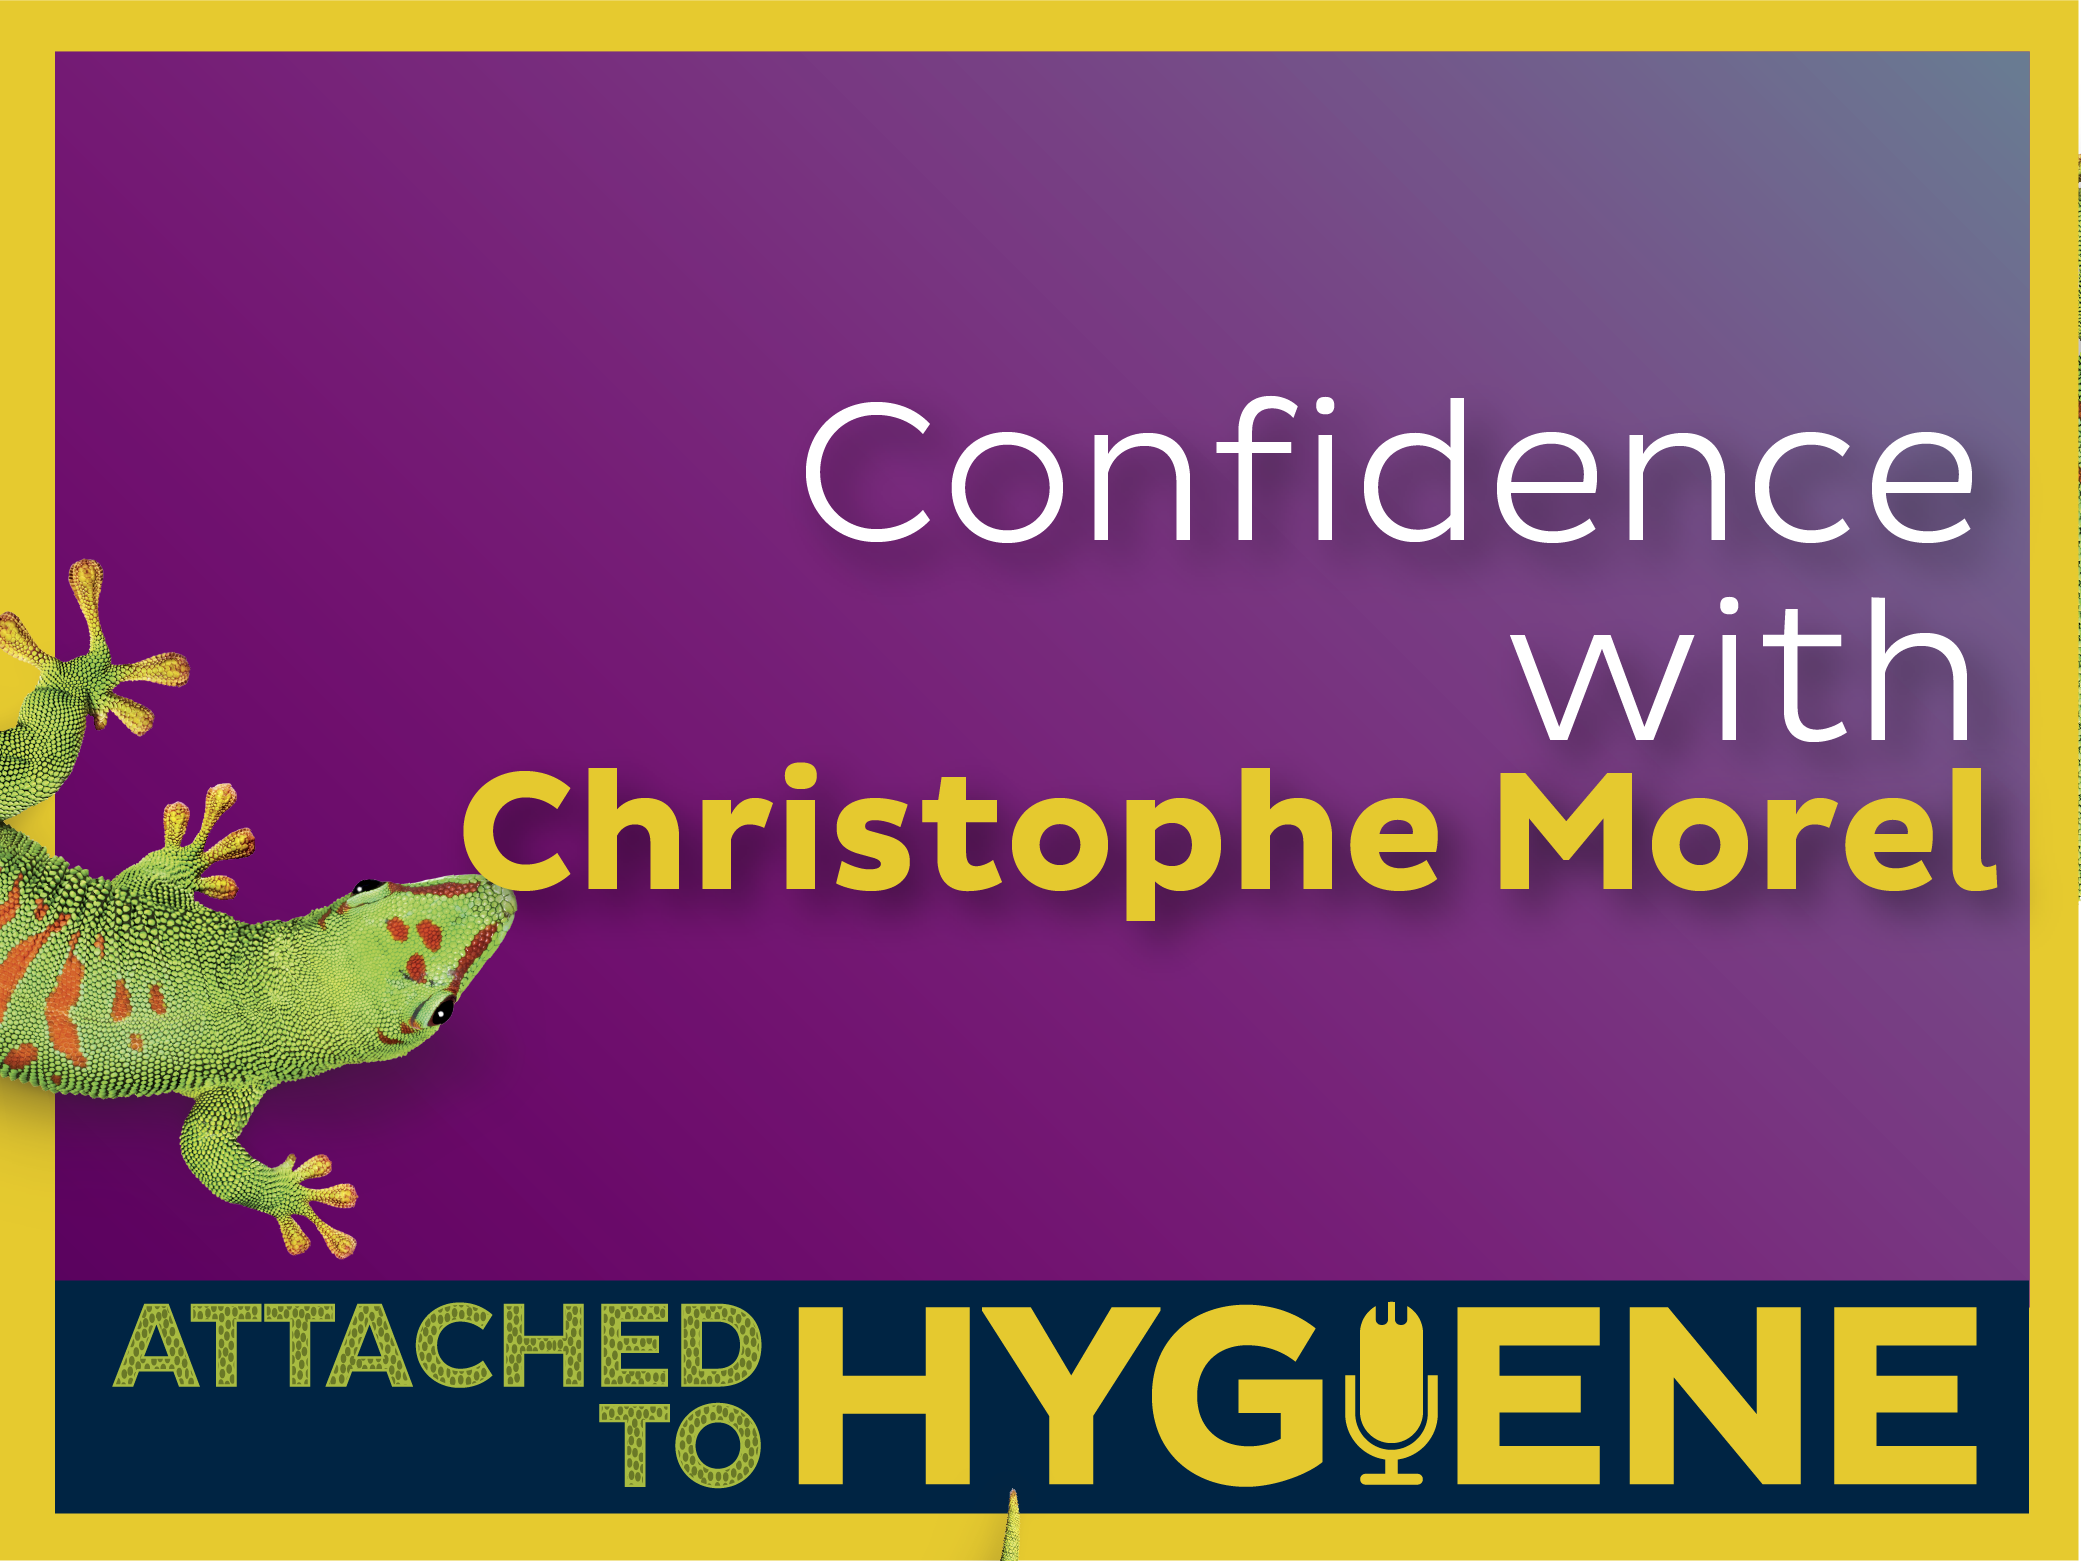 Confidence-with-Christophe-Morel